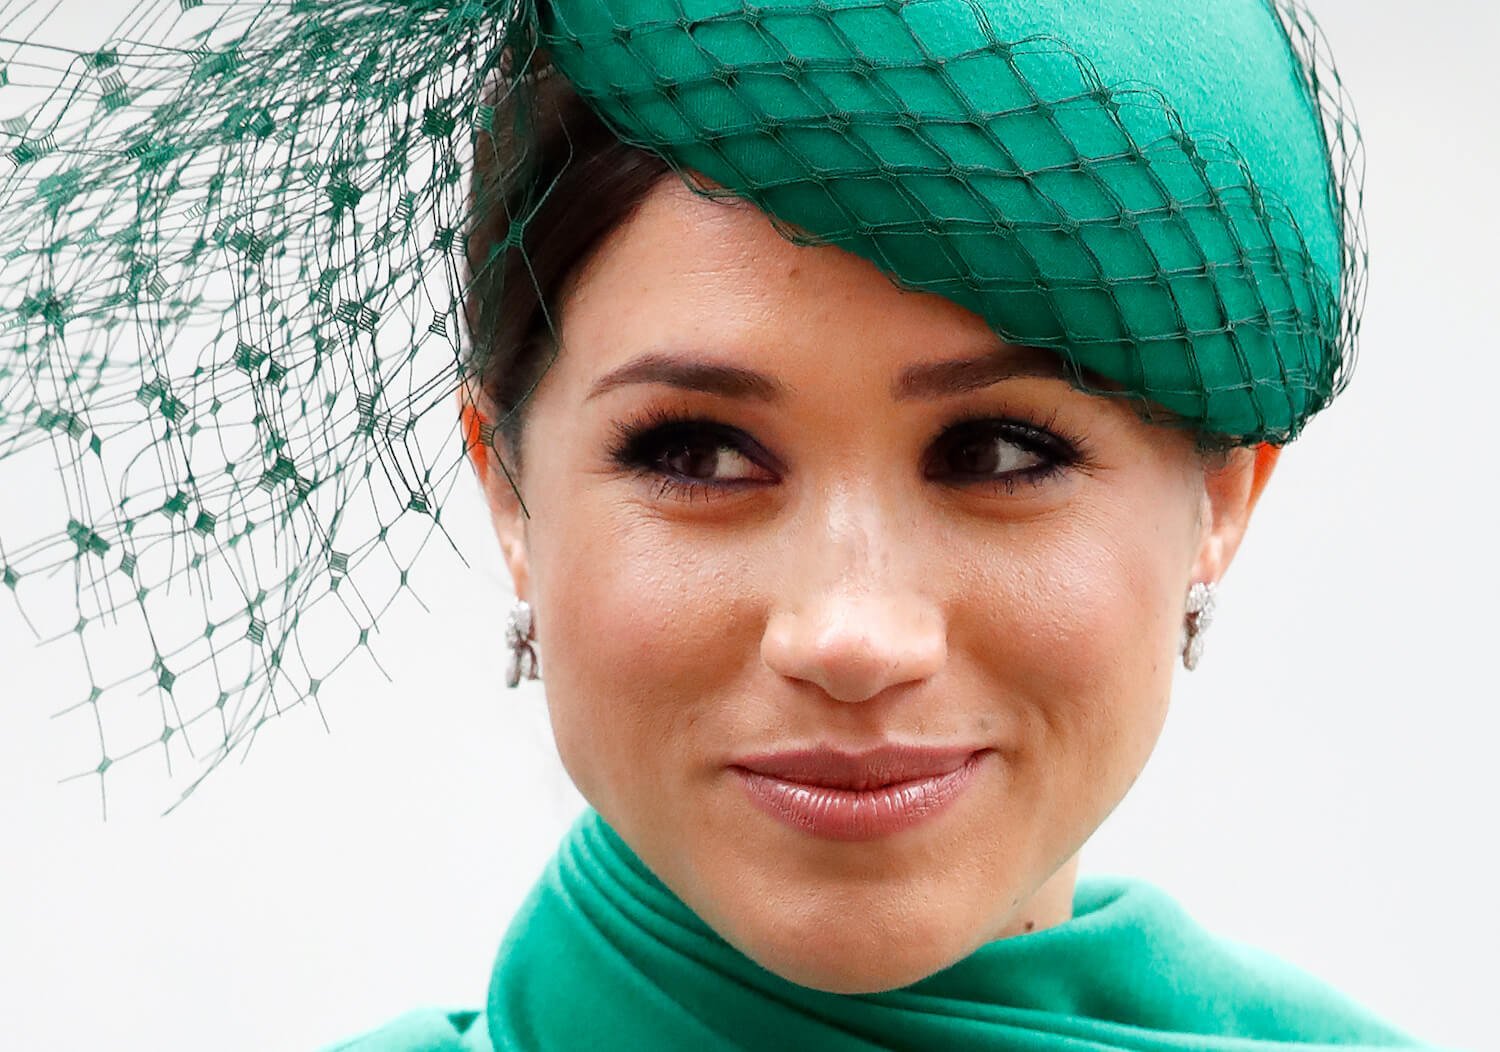 Meghan Markle gives a slight smile in a closeup shot of her wearing a green hat and matching green dress